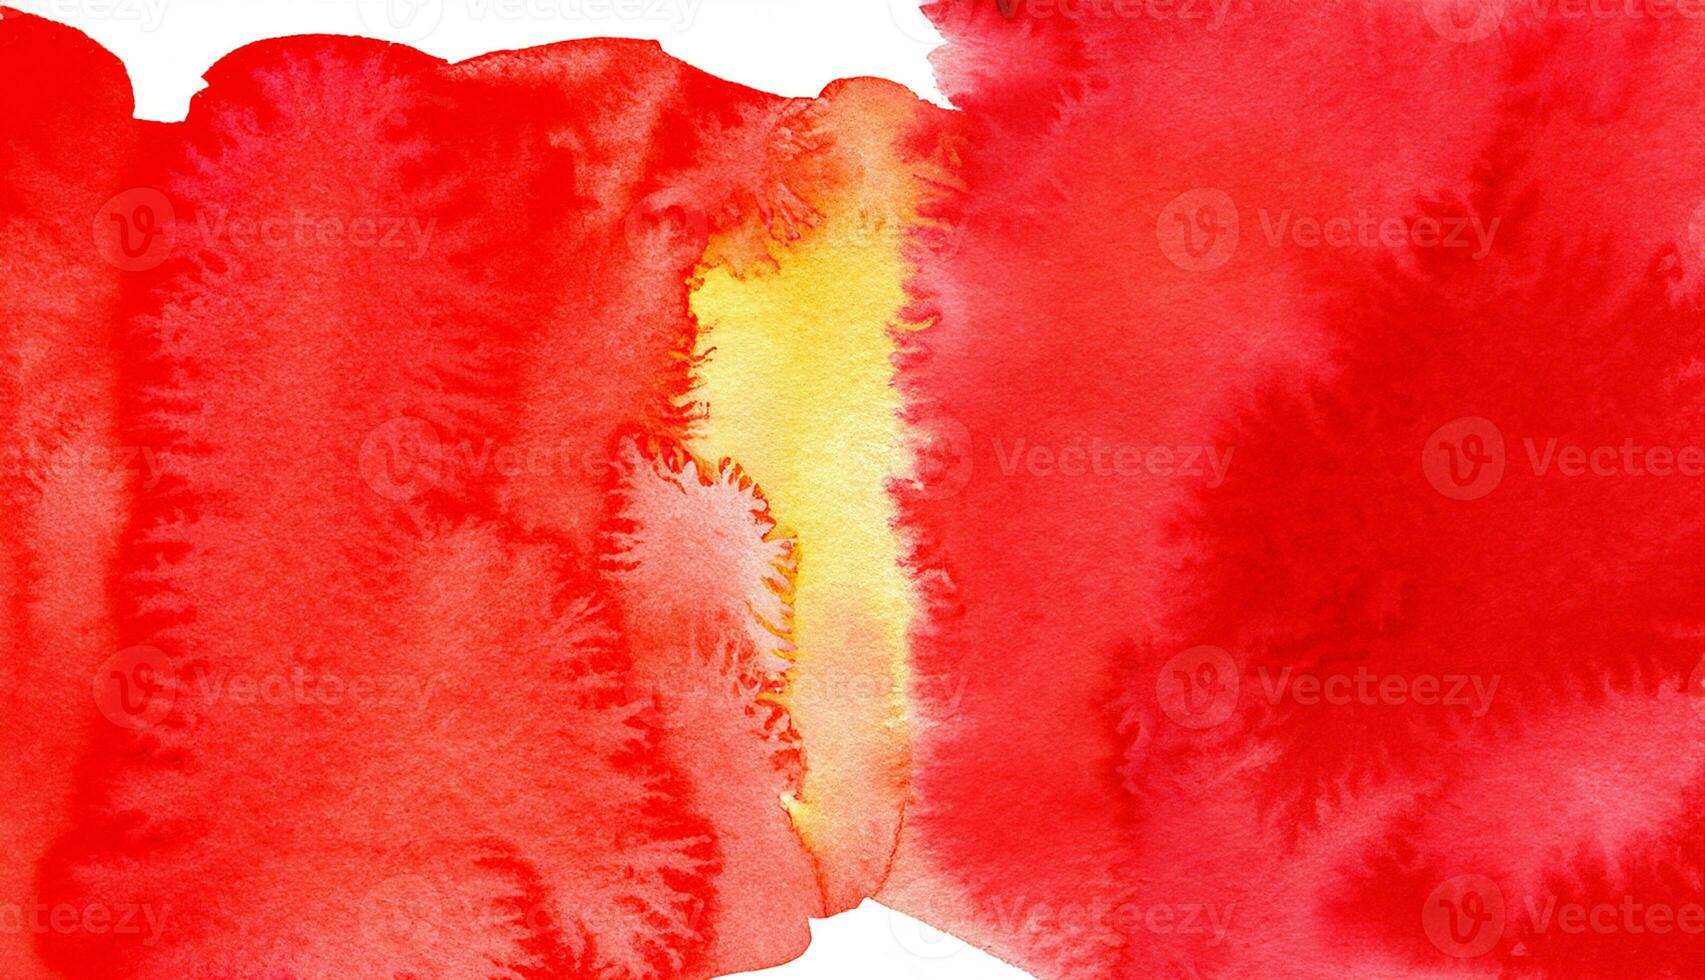 Abstract gradient red and yellow watercolor on white background.The color splashing on the paper photo